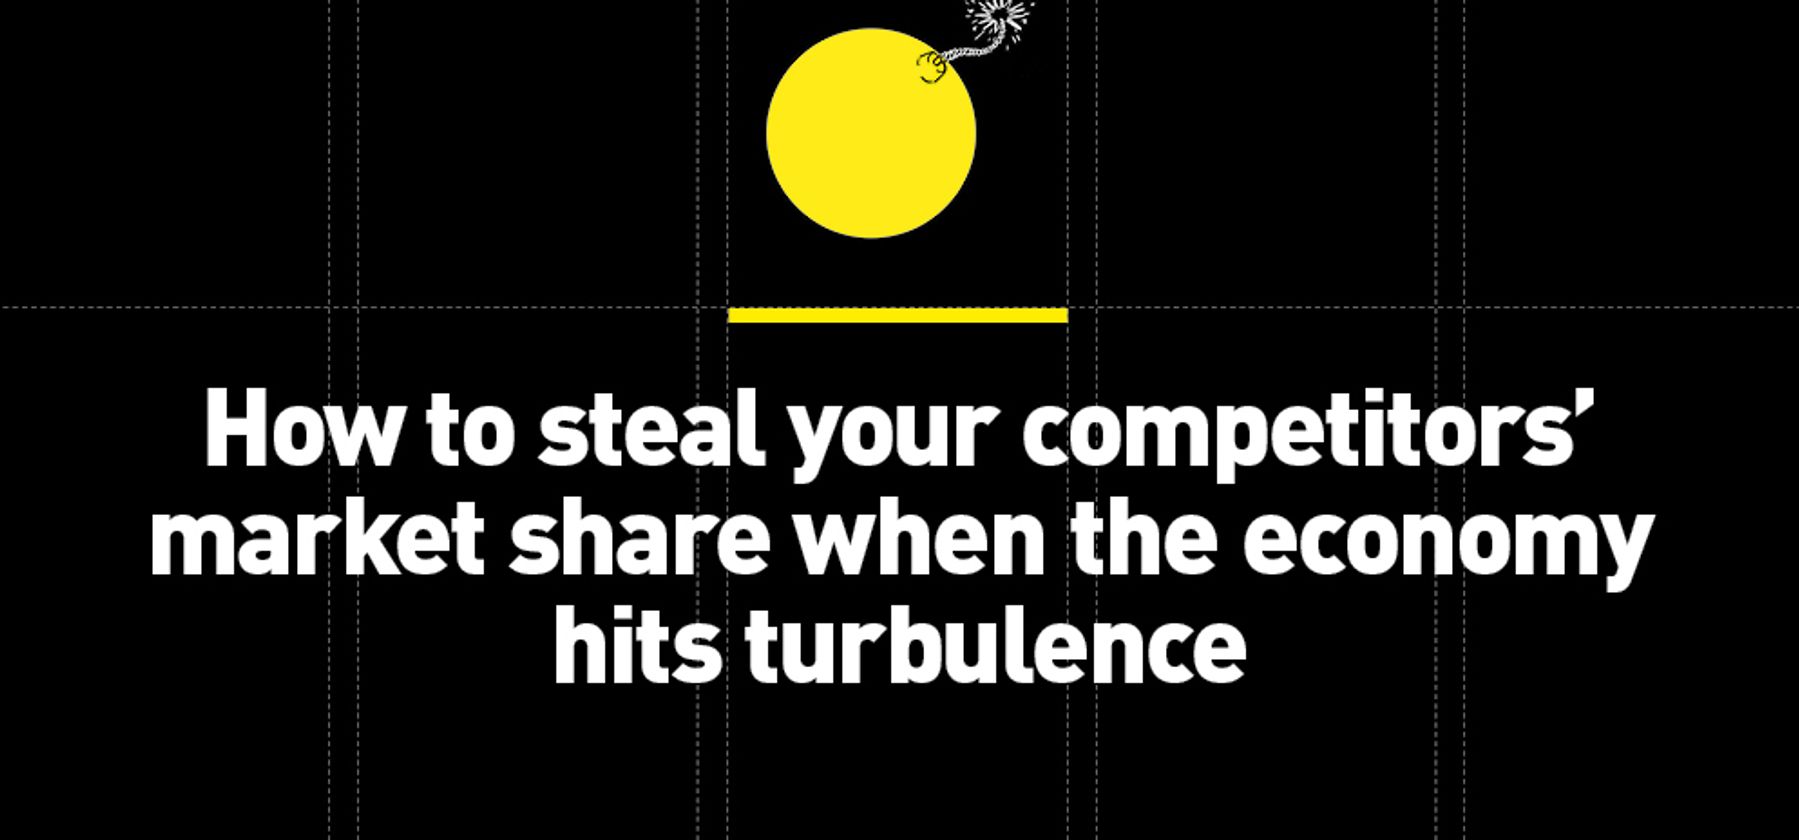 psLondon Thoughts | How to steal your competitors’ market share when the economy hits turbulence